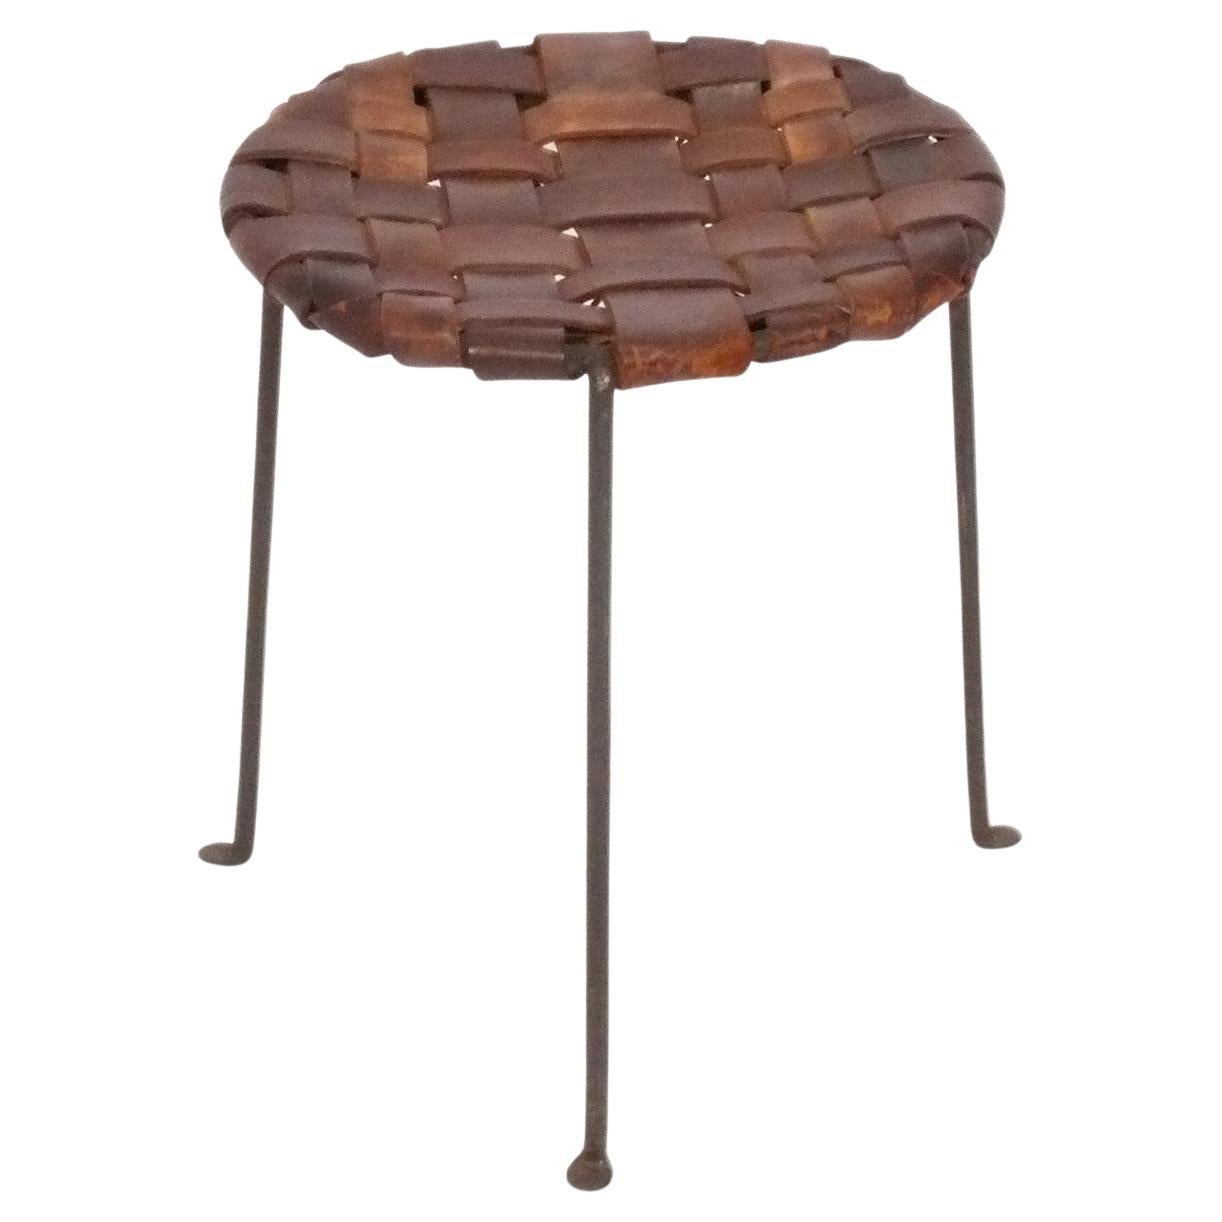 Studio Craft Woven Leather and Iron Stool by Lila Swift and Donald Monell For Sale